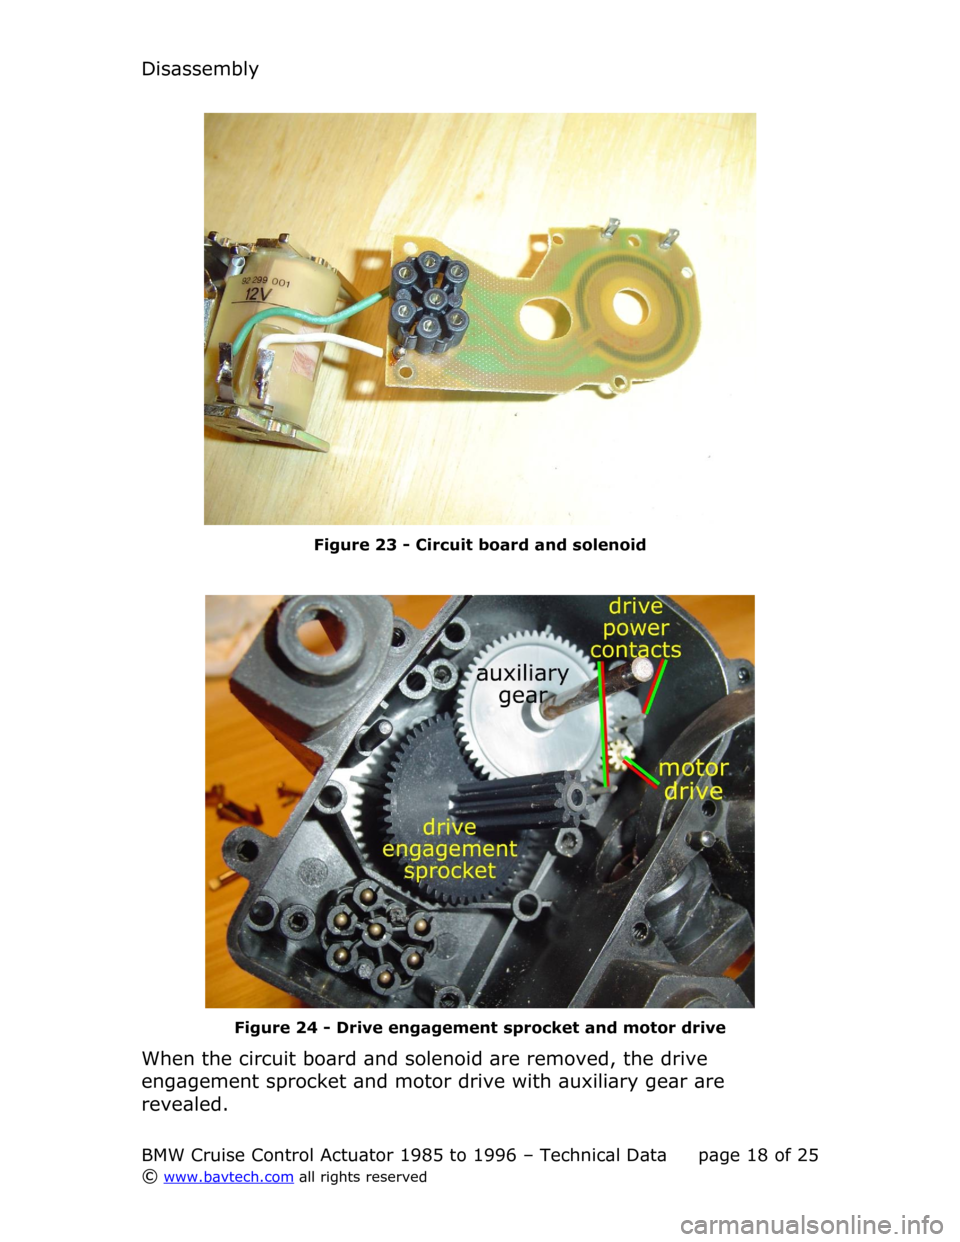 BMW 5 SERIES 1995 E34 Cruise Control Acutator Disassembly
Figure  23  - Circuit board and solenoid
Figure  24  - Drive engagement sprocket and motor drive
When the circuit board and solenoid are removed, the drive  
engagement sprocket and motor 